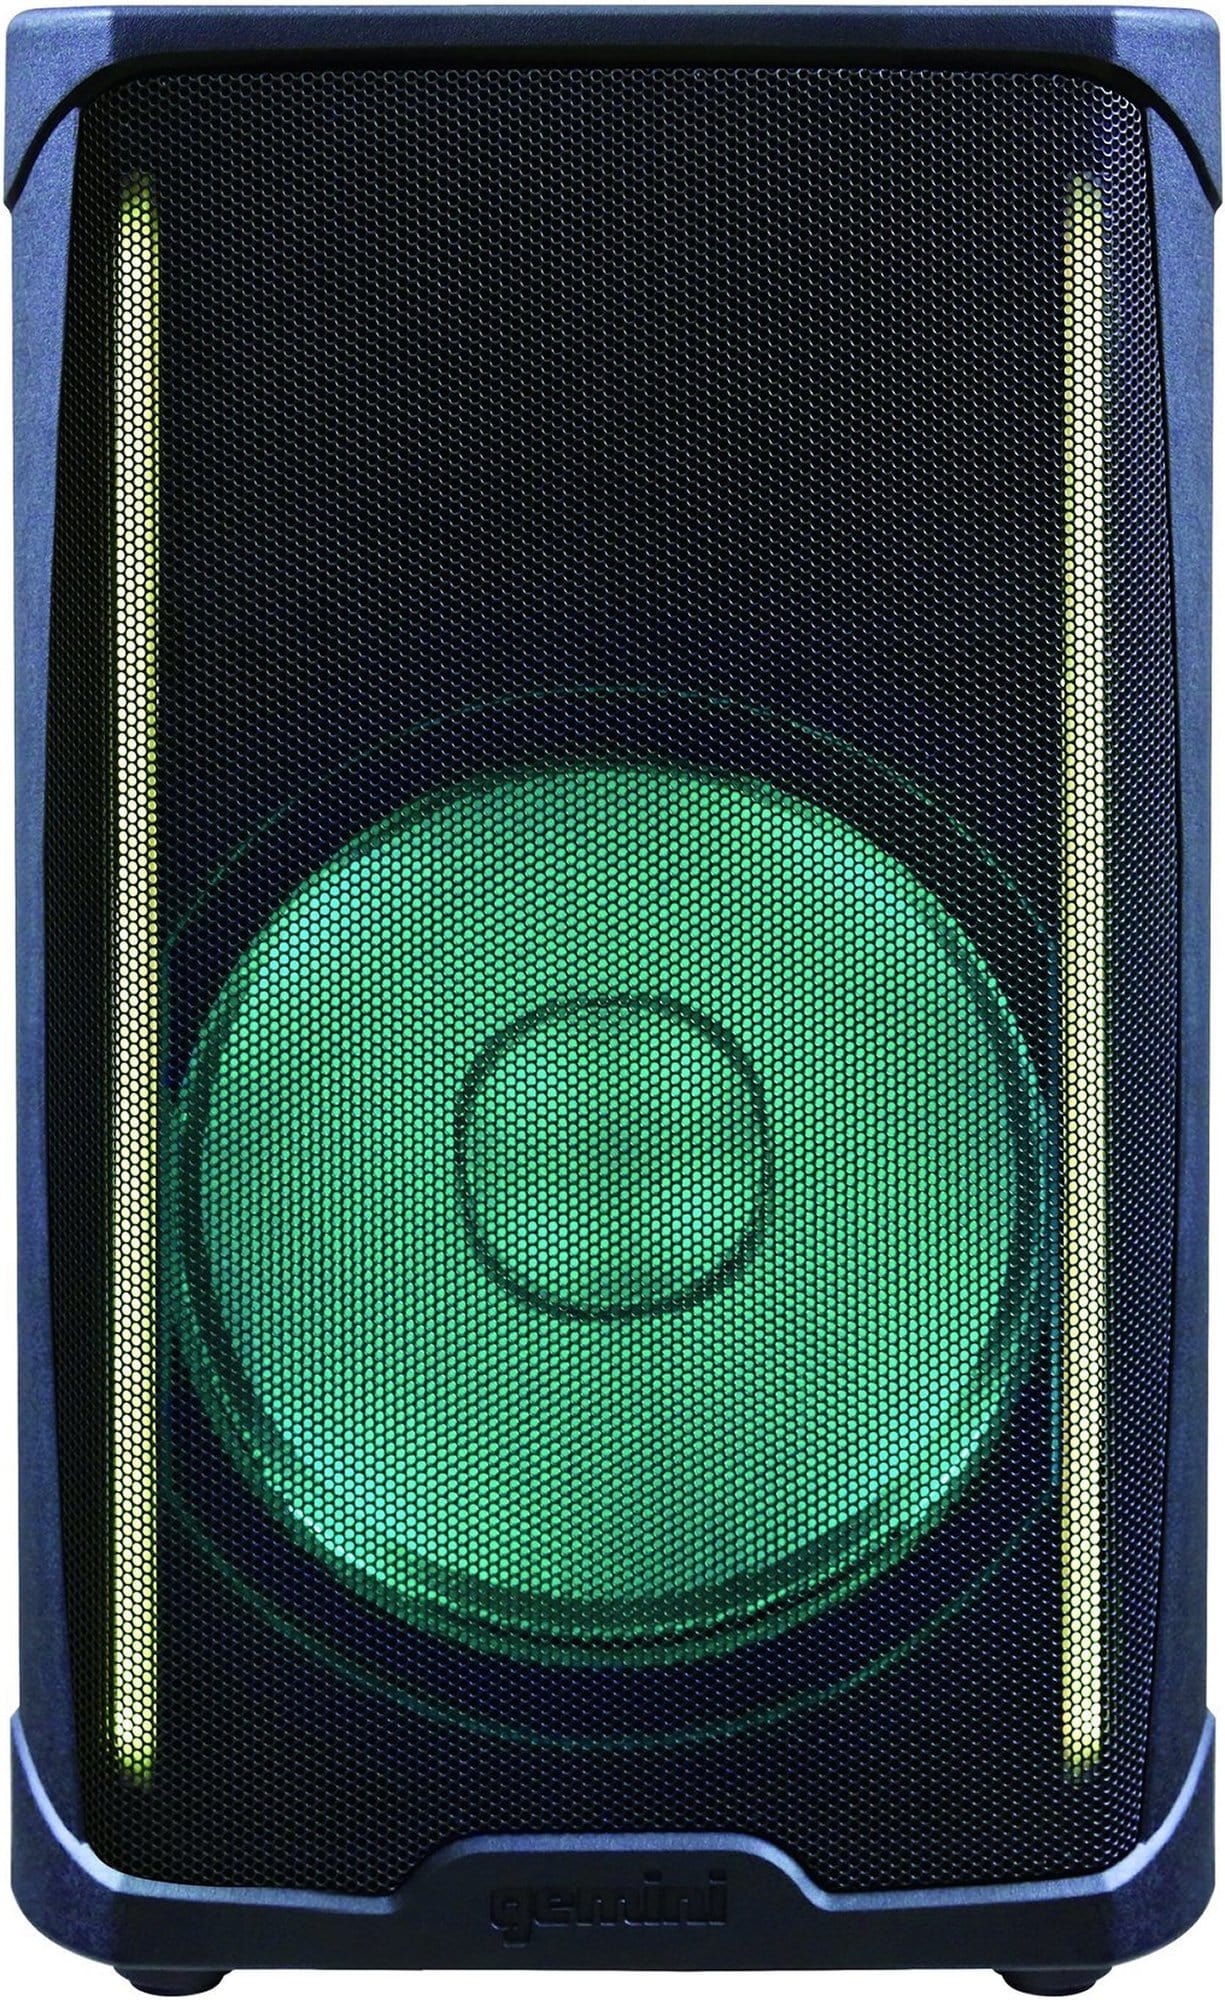 Gemini GD-L115BT 15-in Powered Speaker w/ Lights - ProSound and Stage Lighting